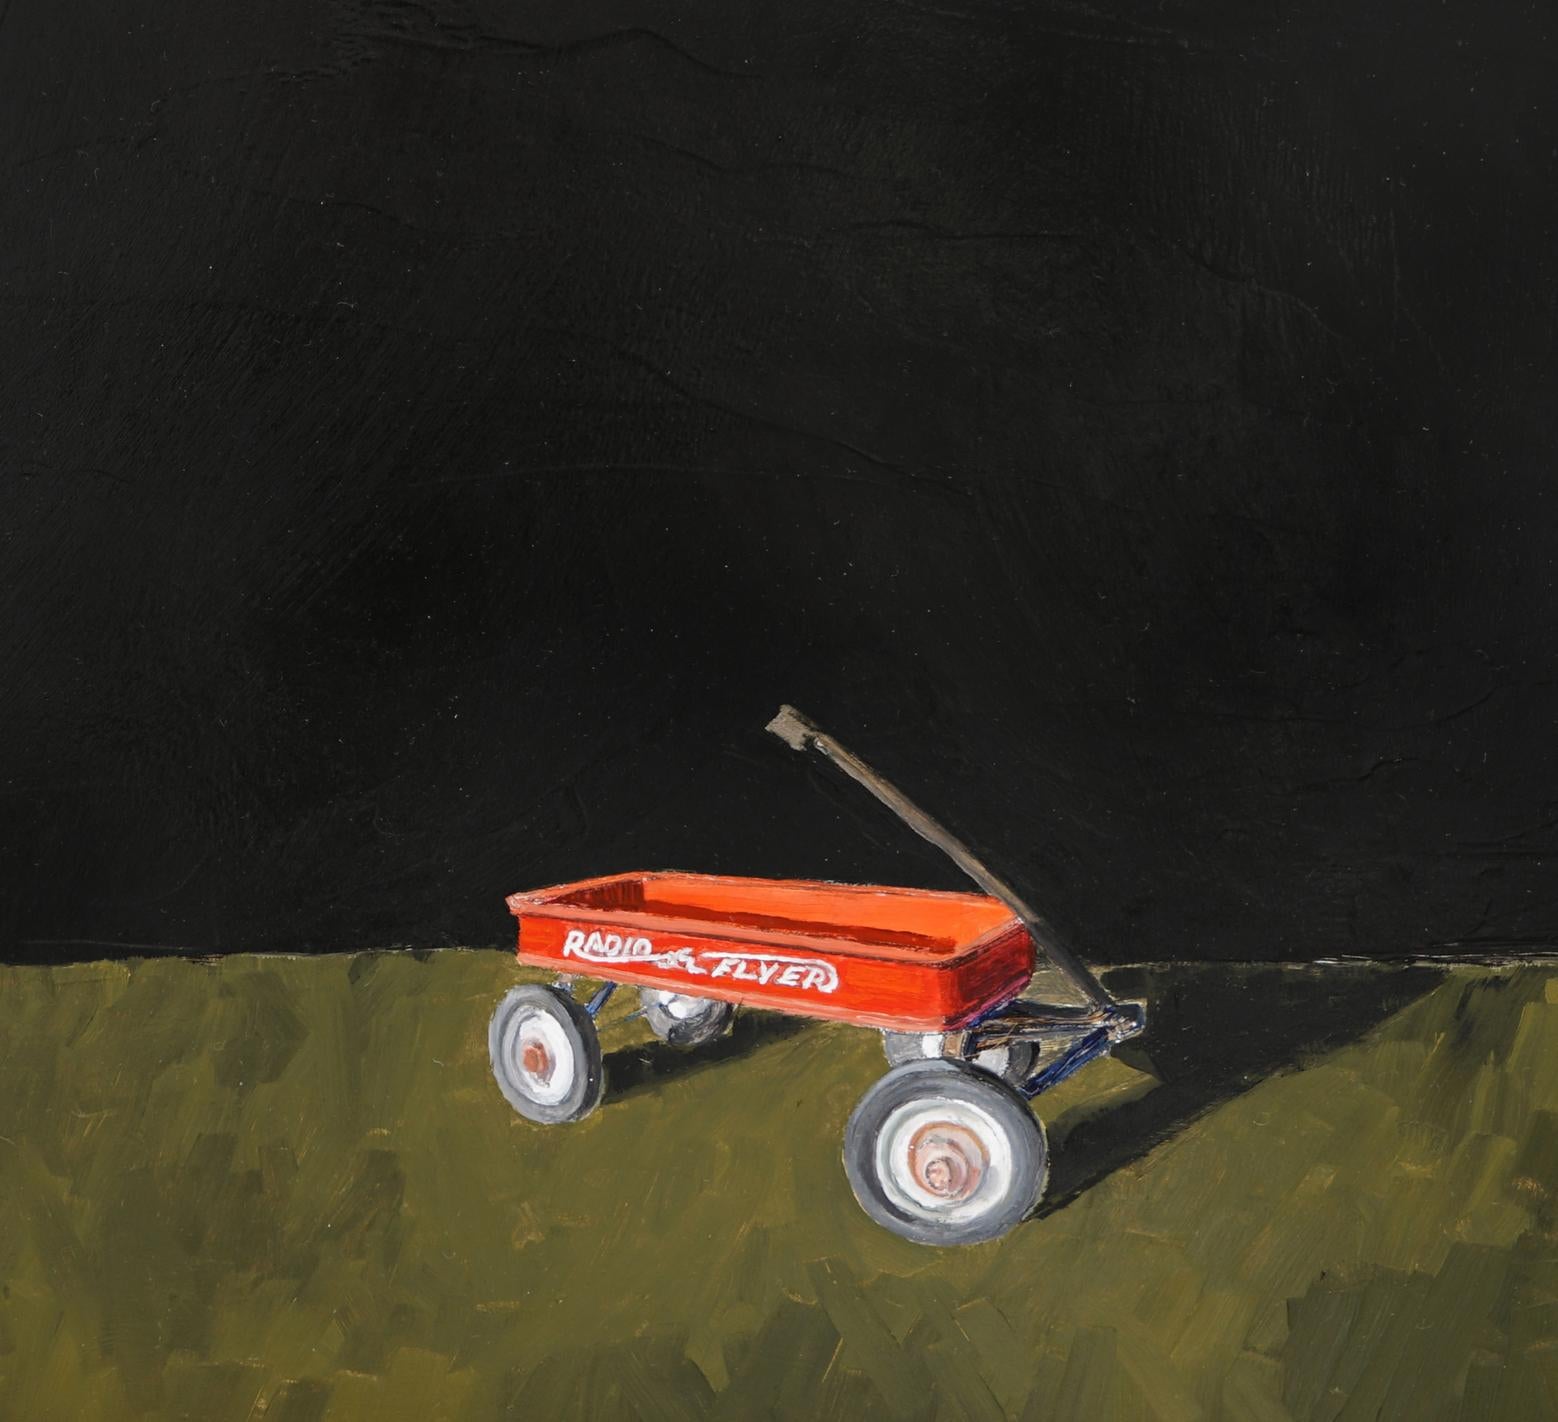   LOOK FOR FREE SHIPPING AT CHECKOUT. 

 Done for the Day is an 11 x 14 ( 17 x 20 framed ) oil on panel painting of the famous Radio Flyer Red Wagon that many children had growing up in the USA. This is the history of Radio Flyer that is depicted in